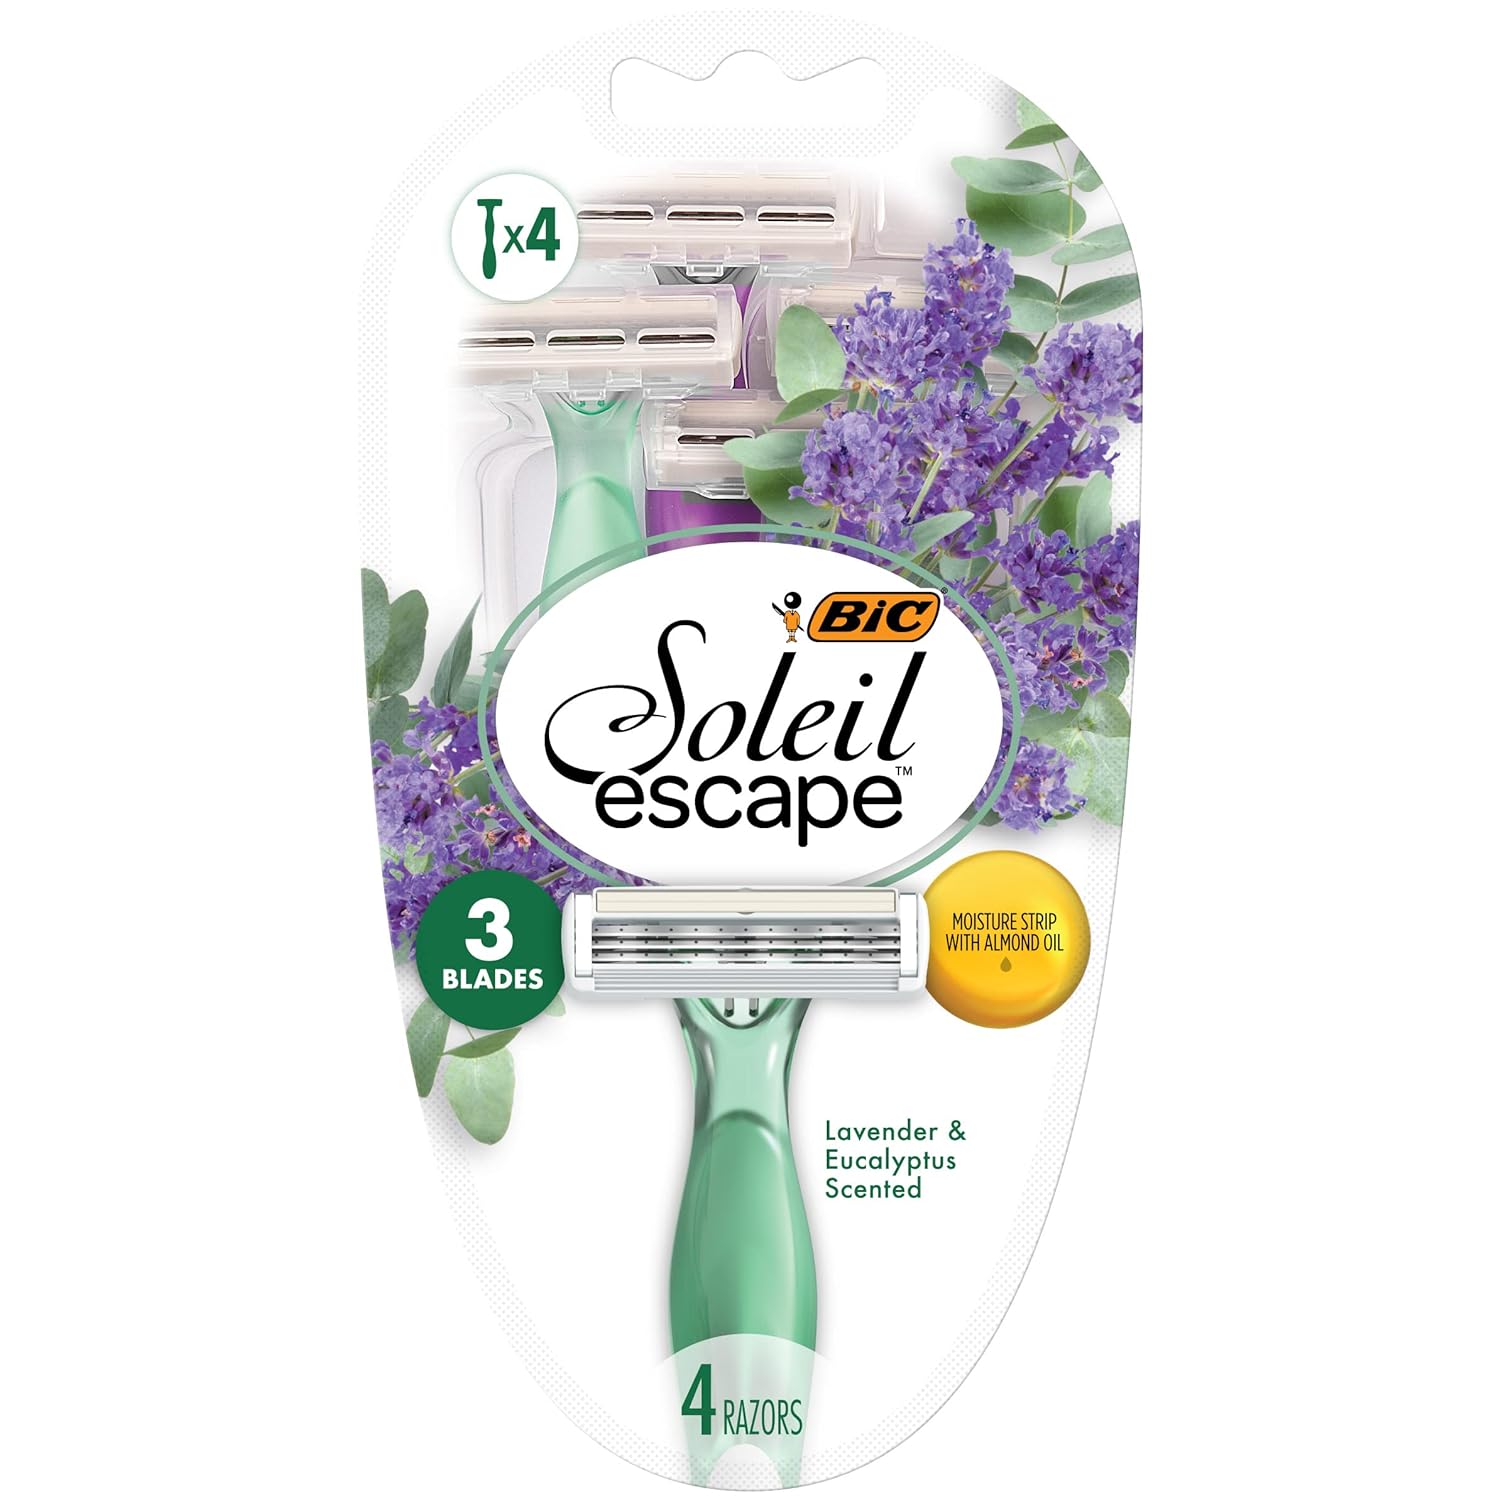 BIC Soleil Escape Women' Disposable Razors, 3 Blade Razor, Moisture Strip With 100% Natural Almond Oil, Lavender and Eucalyptus Scented Handles, 4 Pack Disposable Razors For Women Green